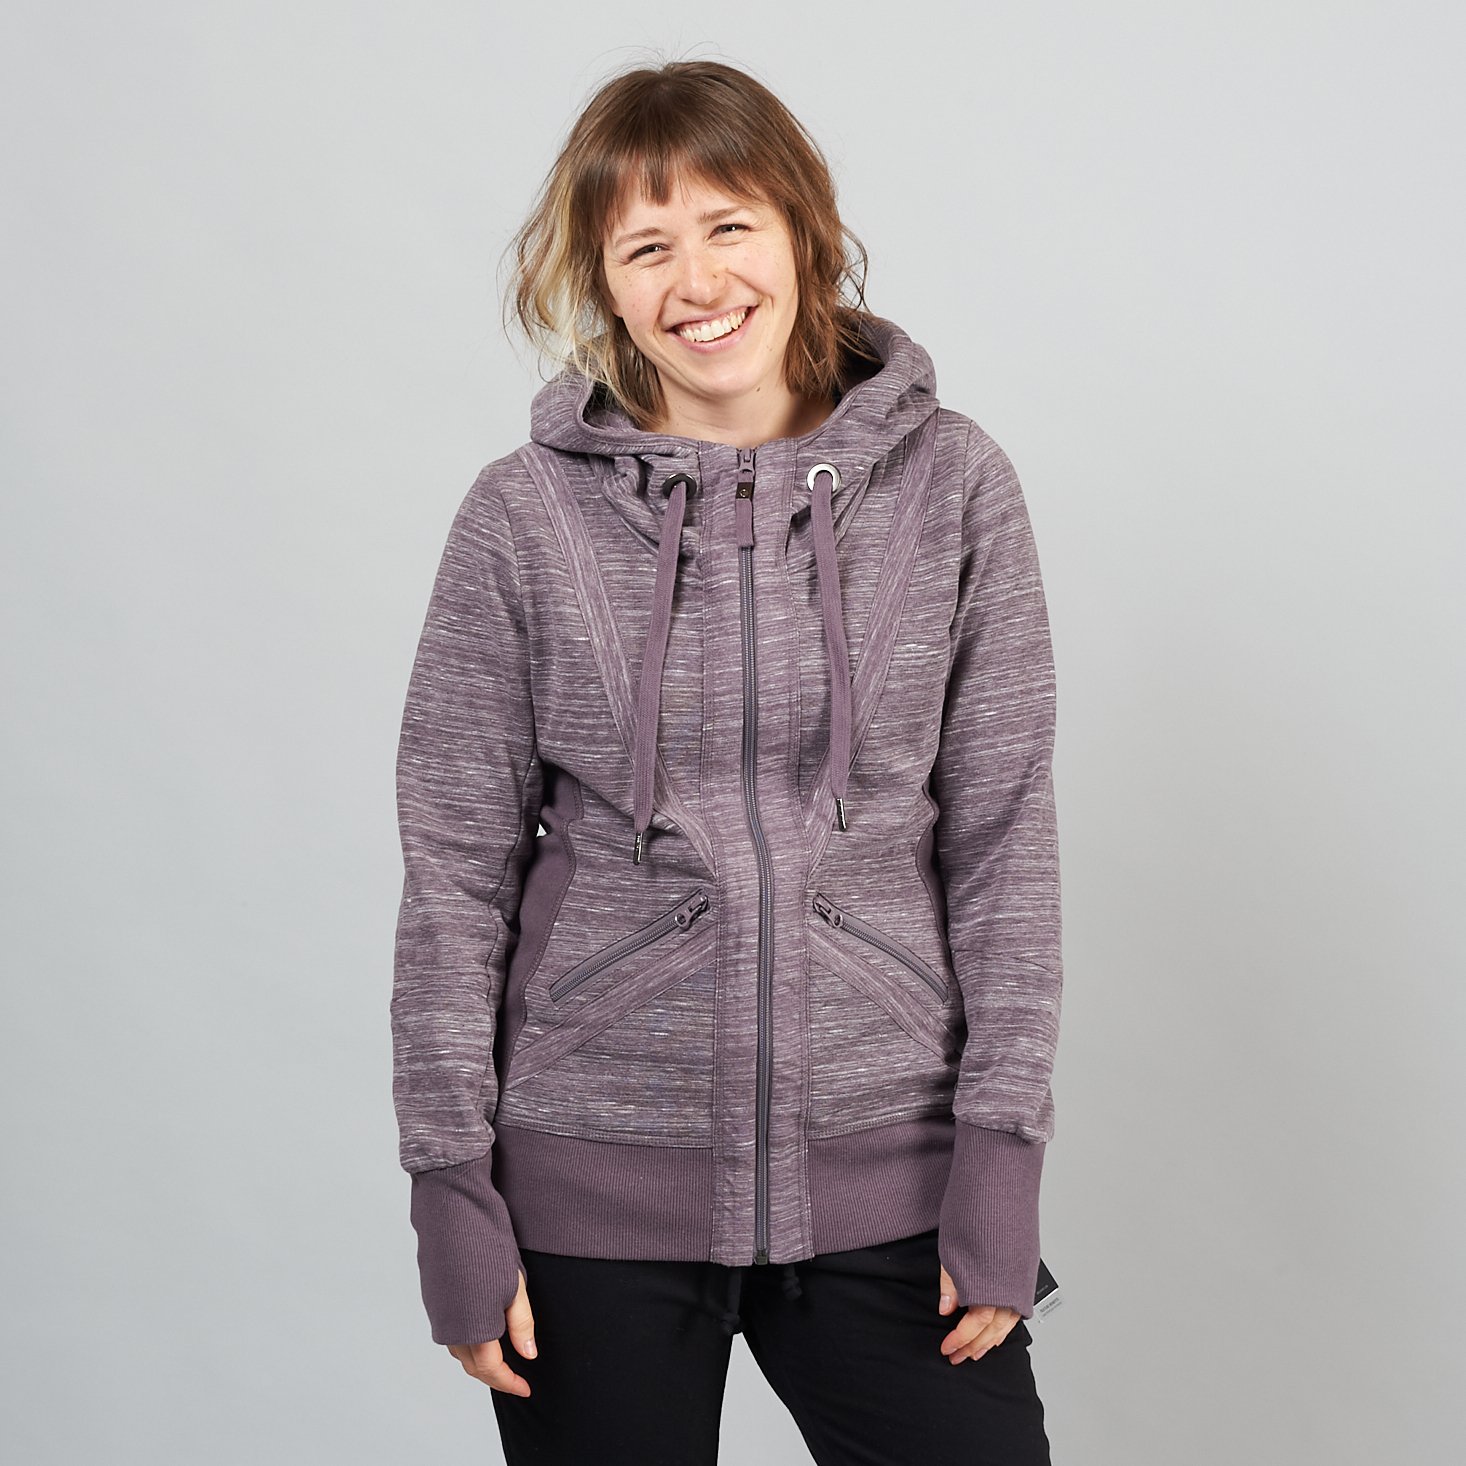 Wantable Fitness Edit February 2020 mpg sport valencia 3.0 heather hoodie in violet smoke